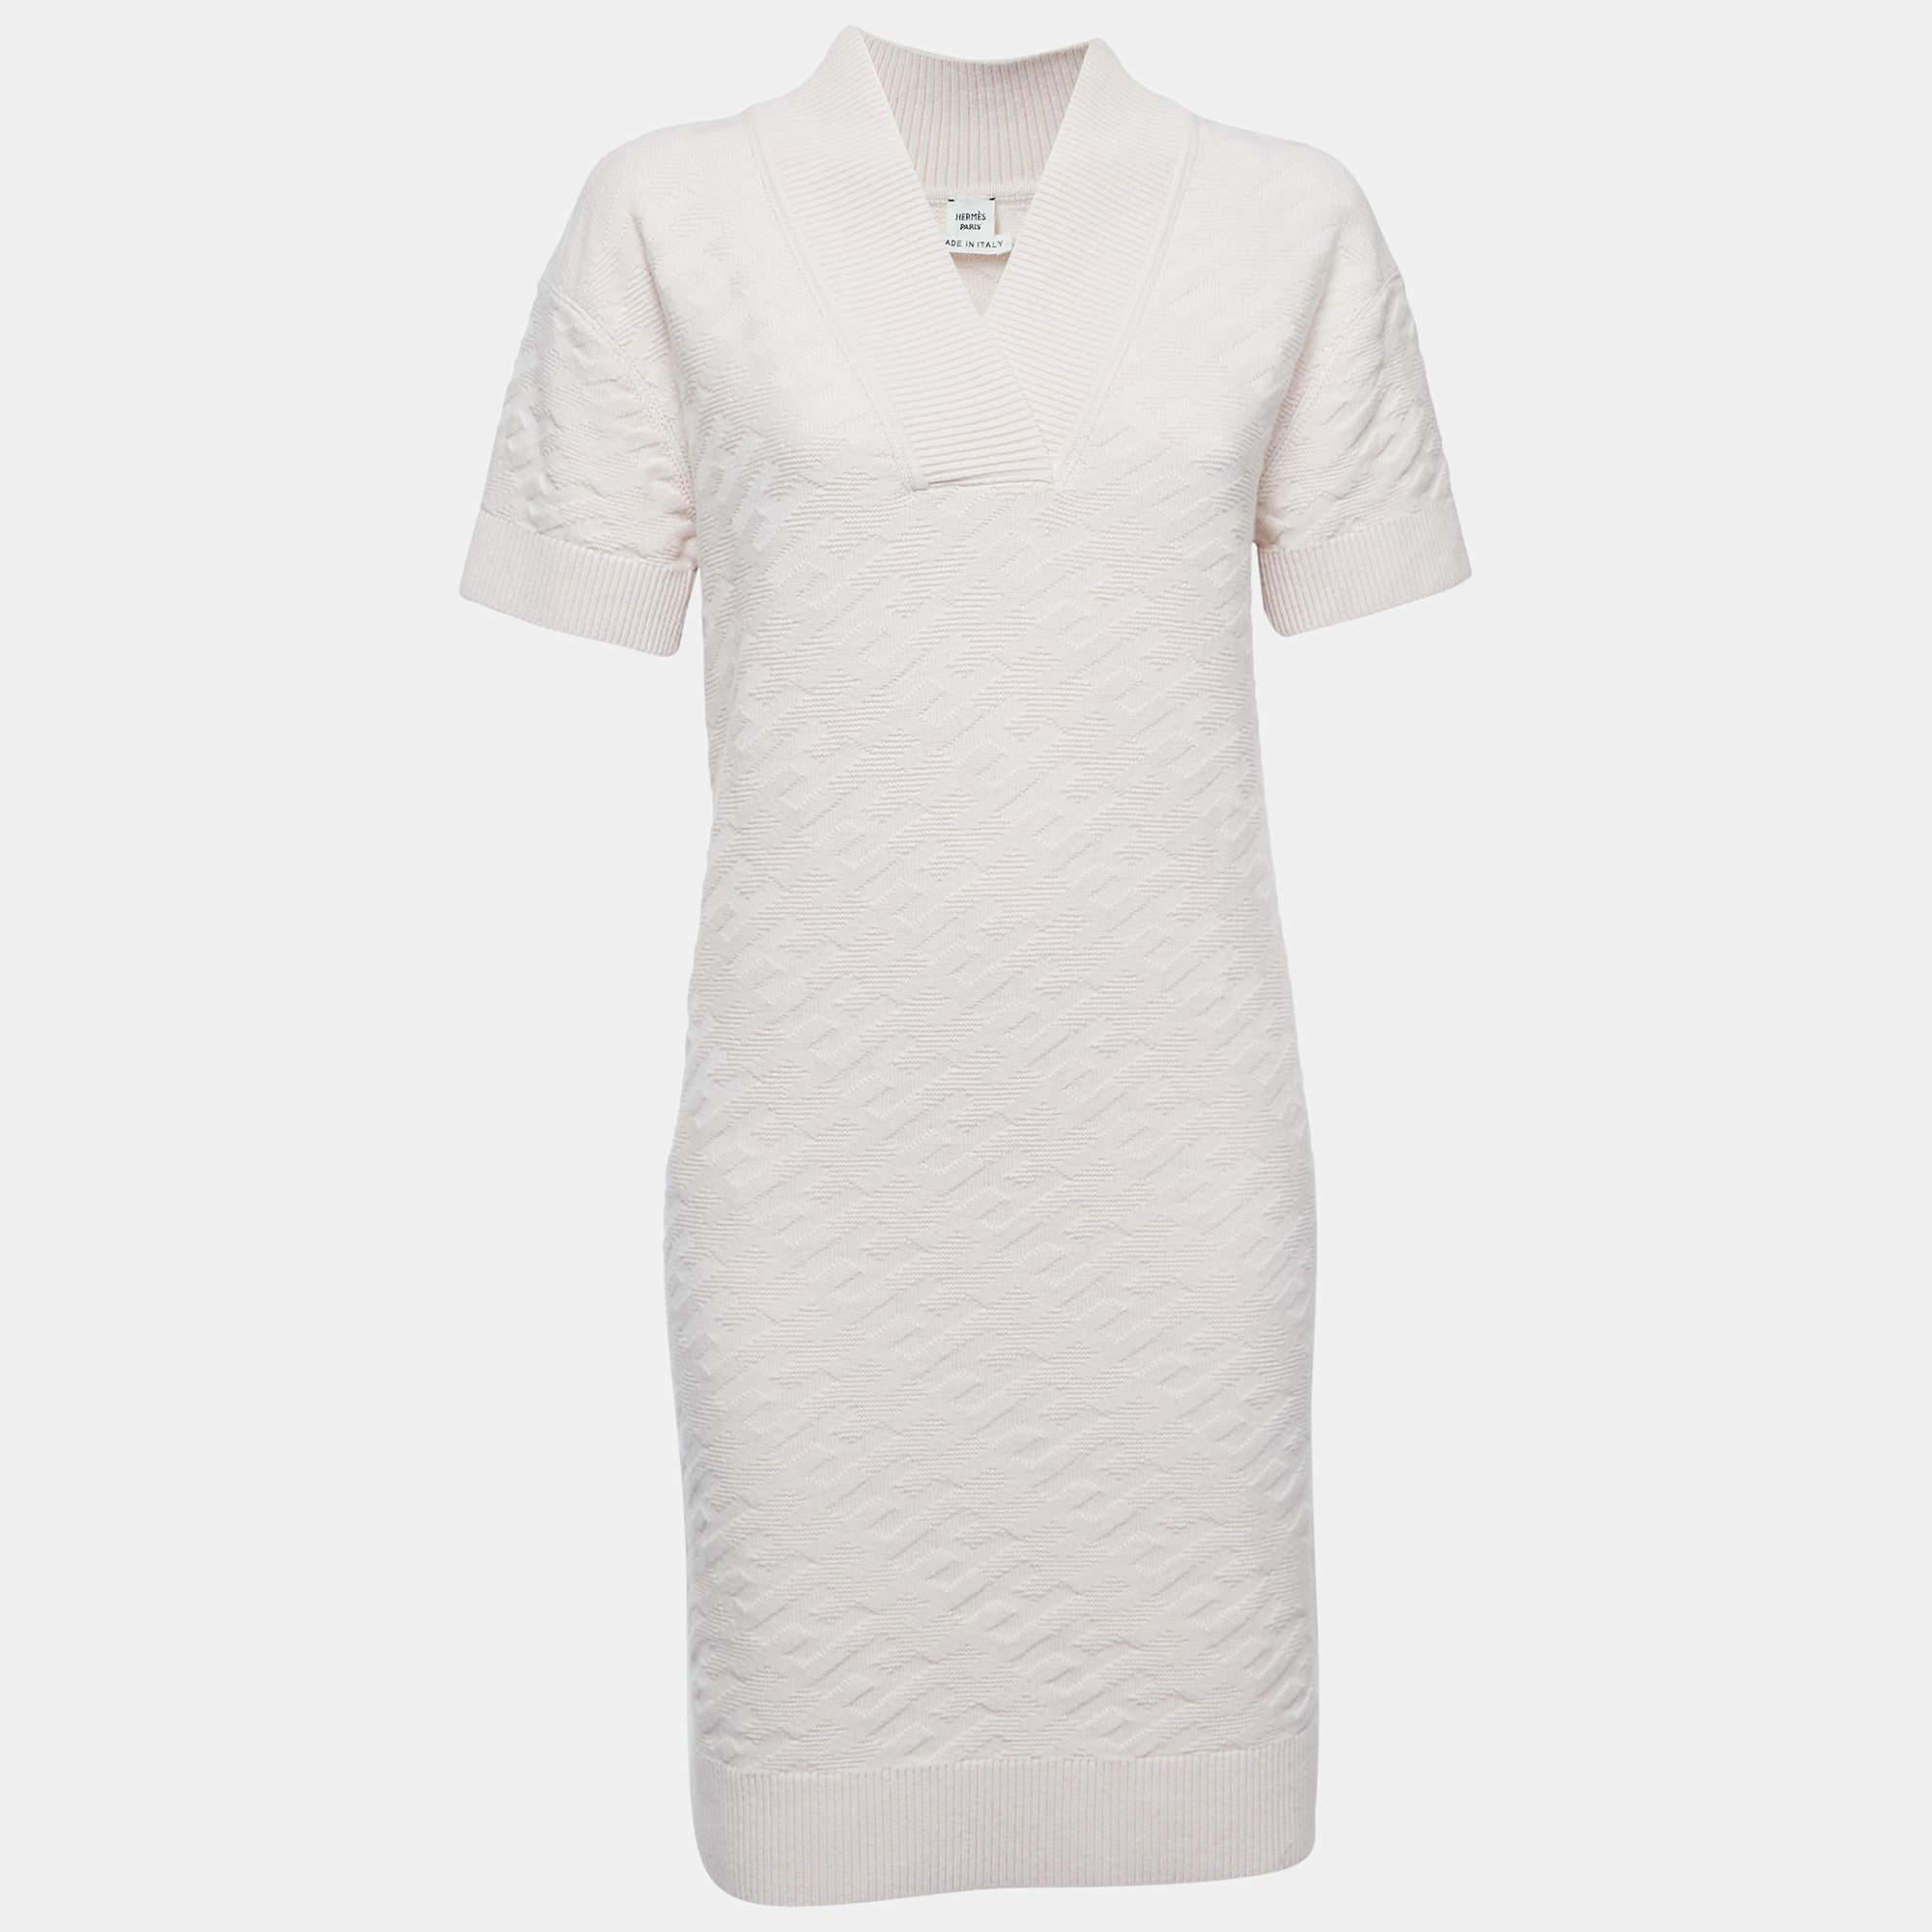 This designer dress is a chic and stylish garment that exudes elegance and sophistication. With its sleek design, flattering silhouette, and high-quality craftsmanship, this dress is perfect for any special occasion or evening event, ensuring you